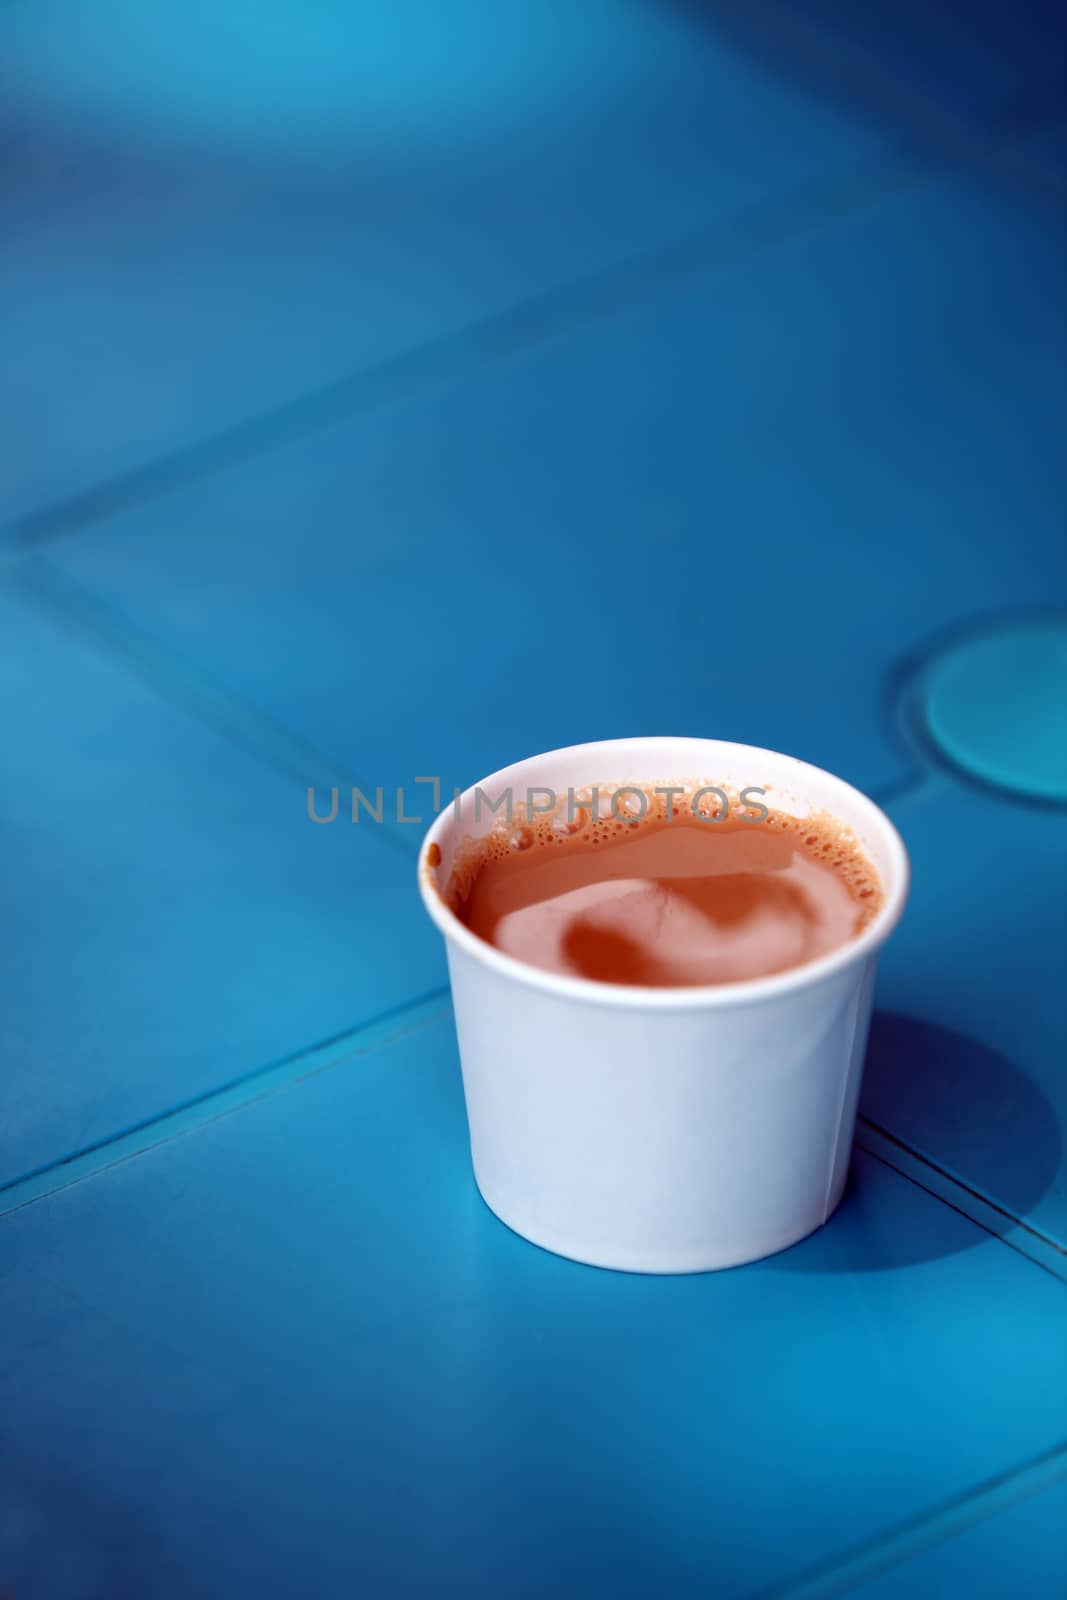 A cup of refreshing tea, kept on a bright blue colored table.